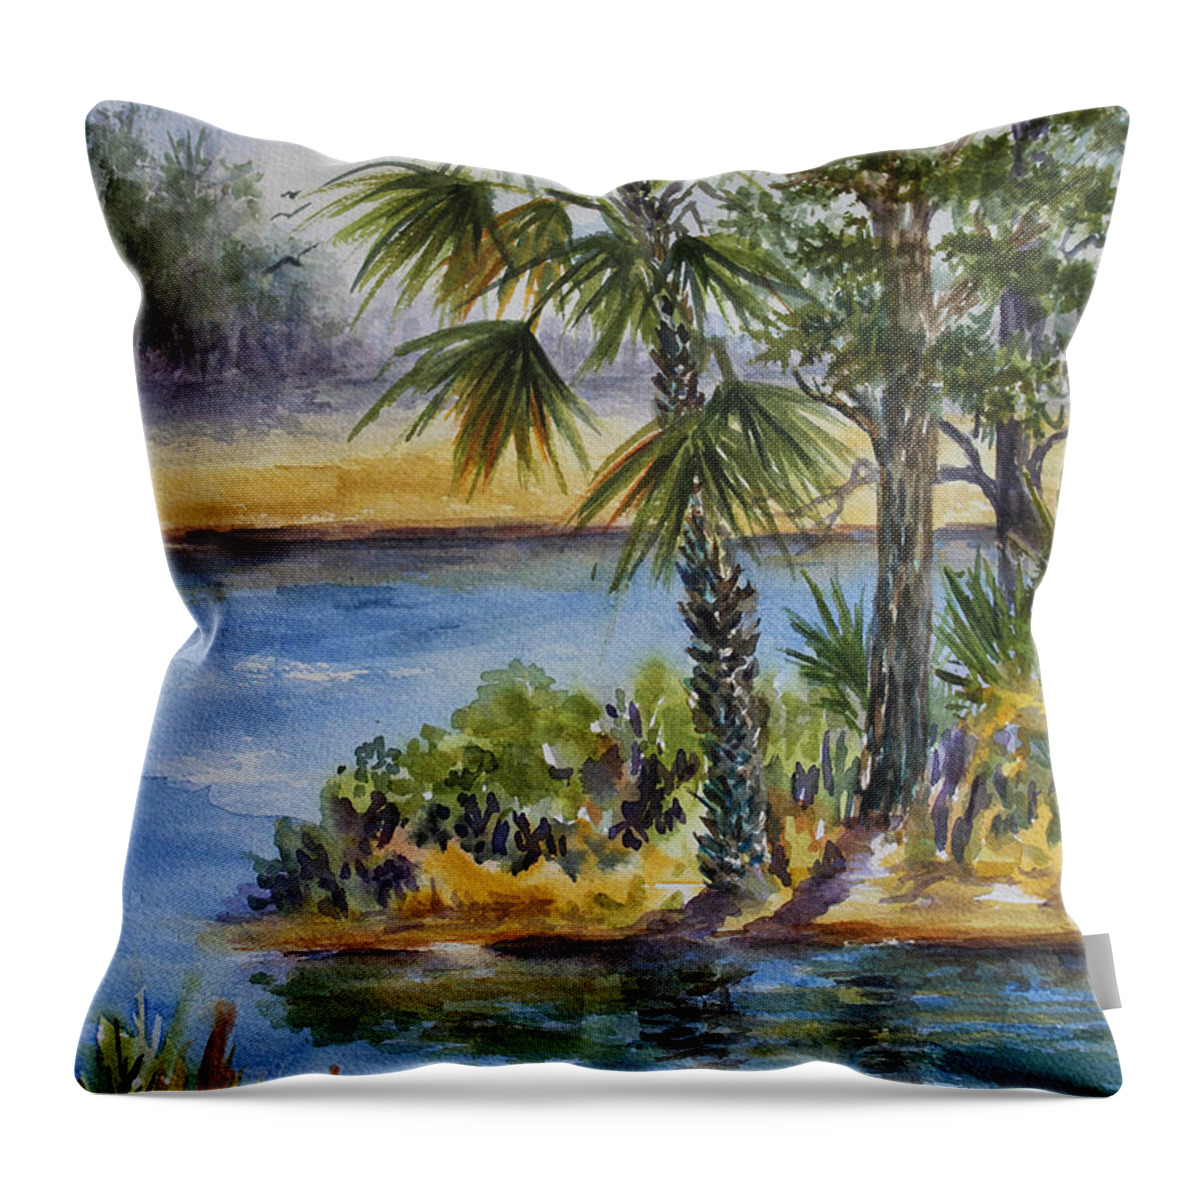 Florida Throw Pillow featuring the painting Florida Pine Inlet by Roxanne Tobaison